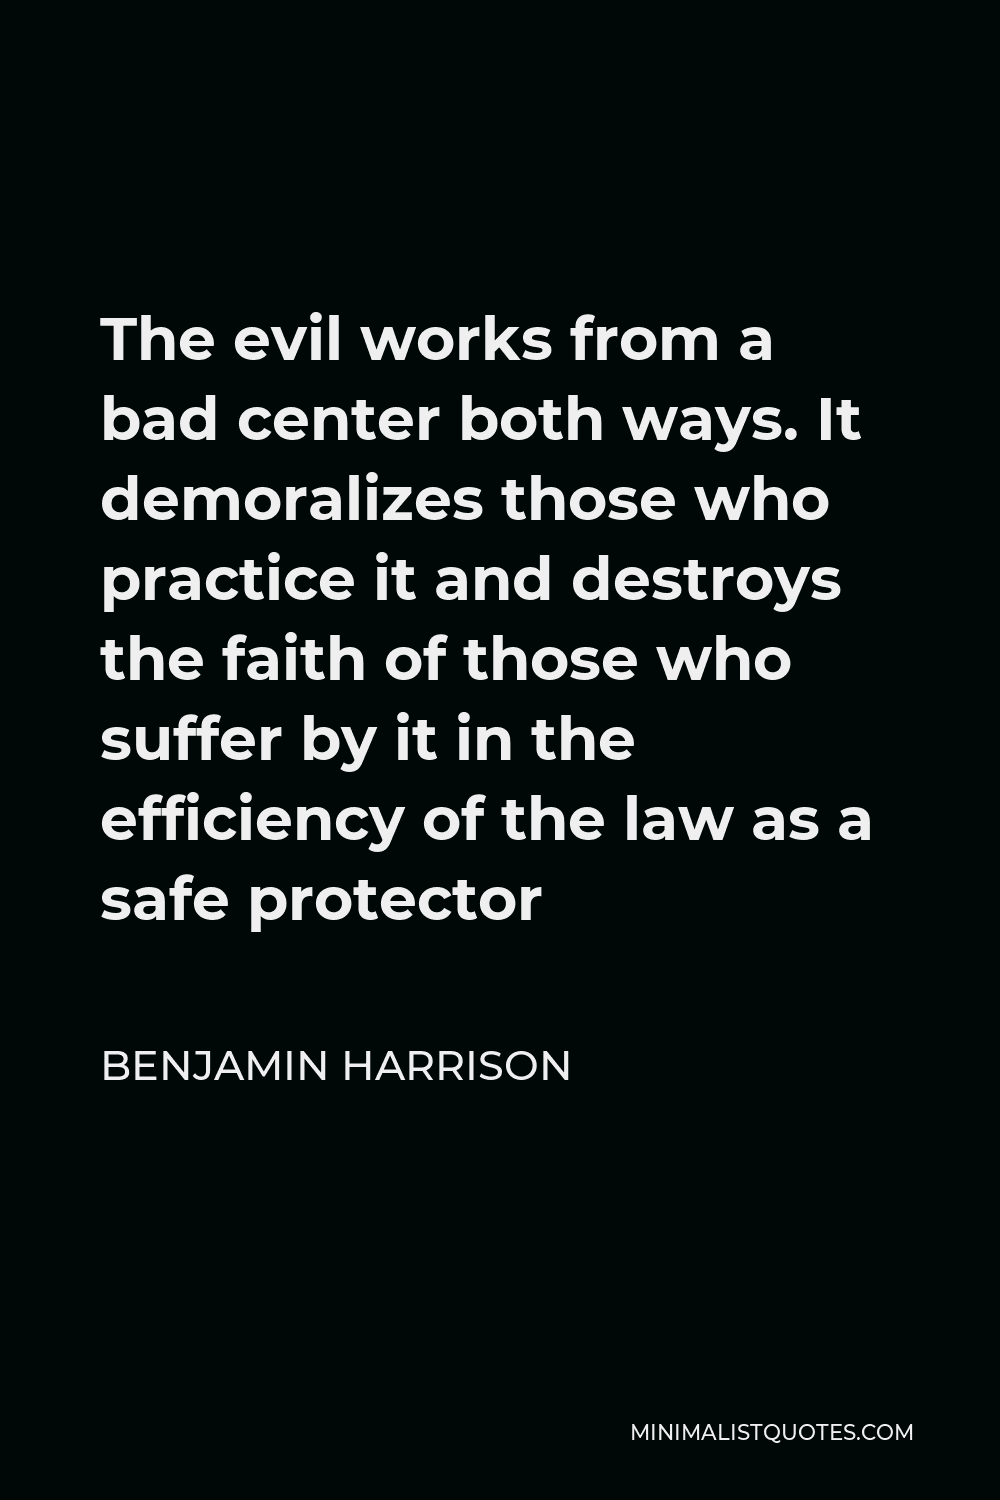 Benjamin Harrison Quote - The evil works from a bad center both ways. It demoralizes those who practice it and destroys the faith of those who suffer by it in the efficiency of the law as a safe protector